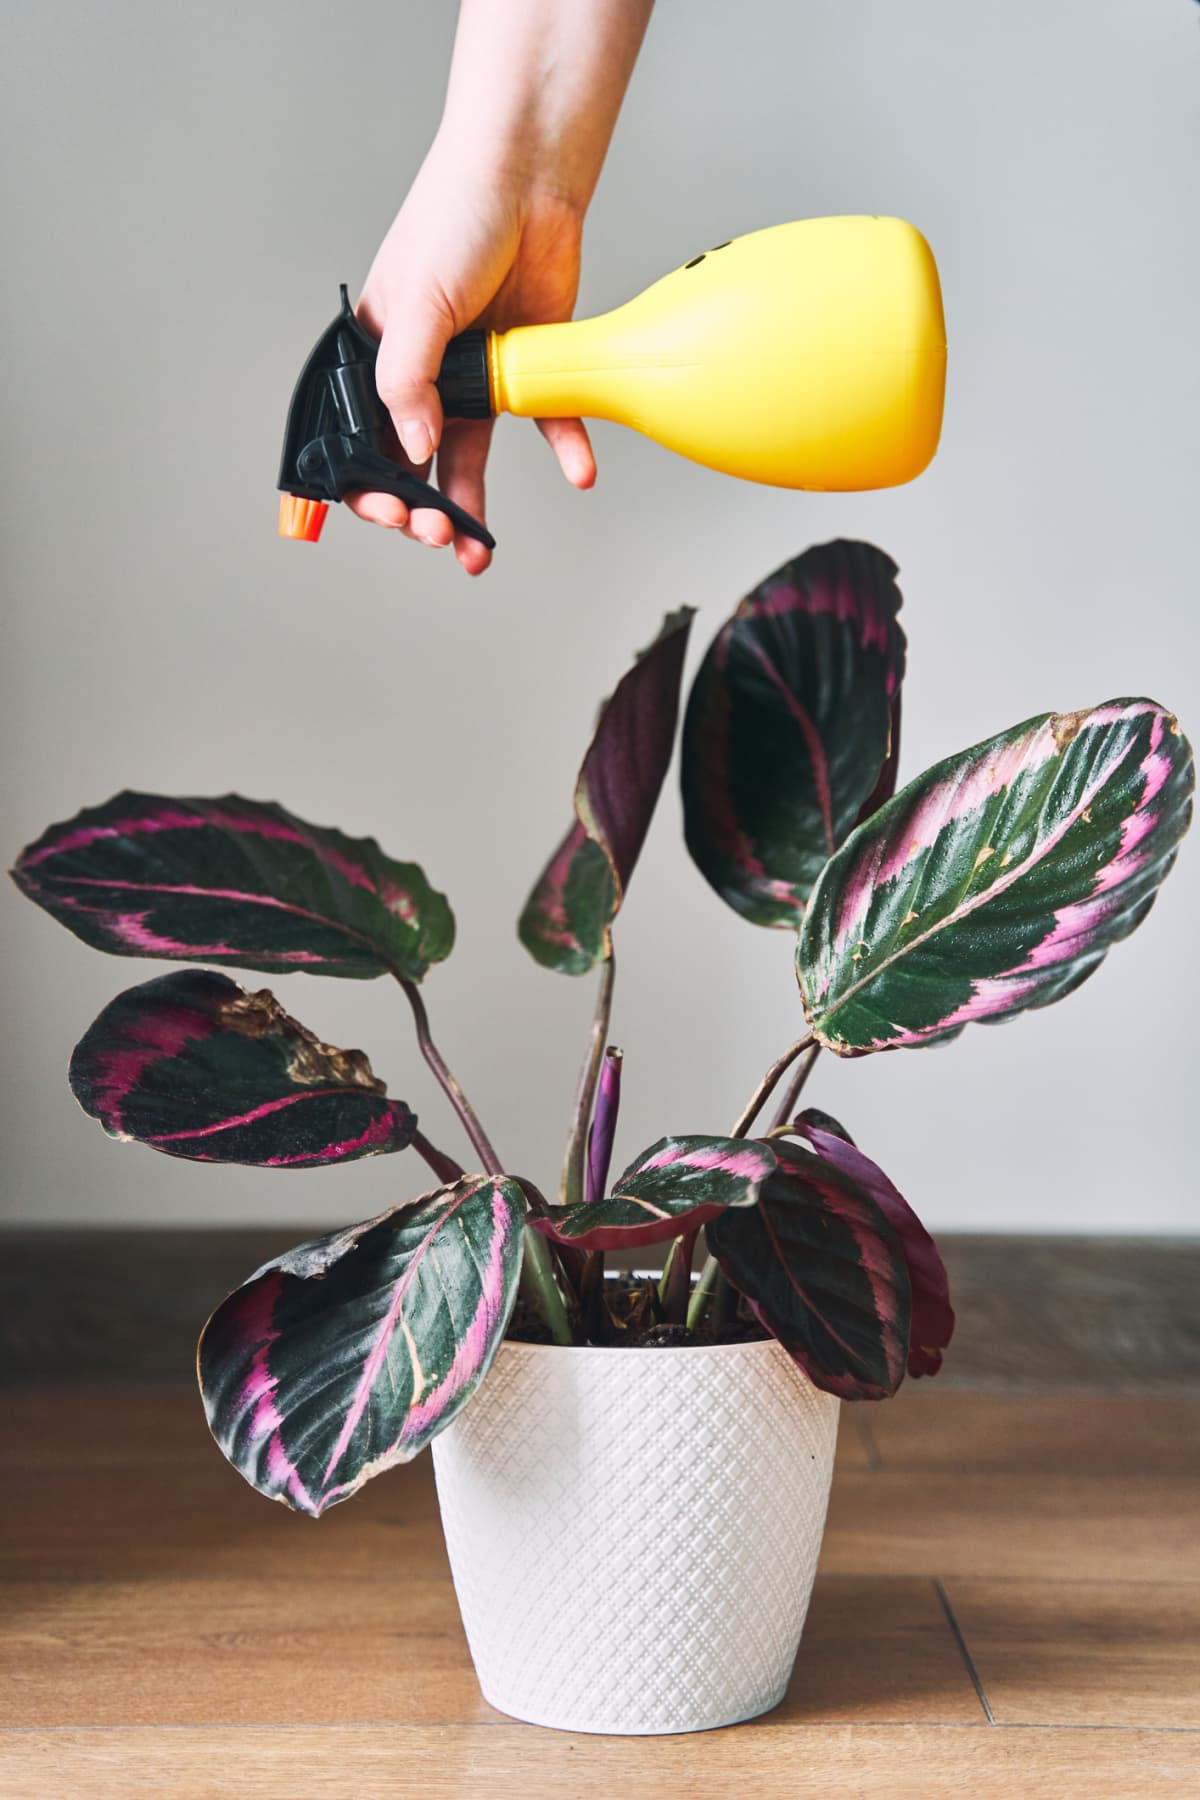 The woman sprays a plant from a spray bottle. Home plant Calathea is watered. High quality photo